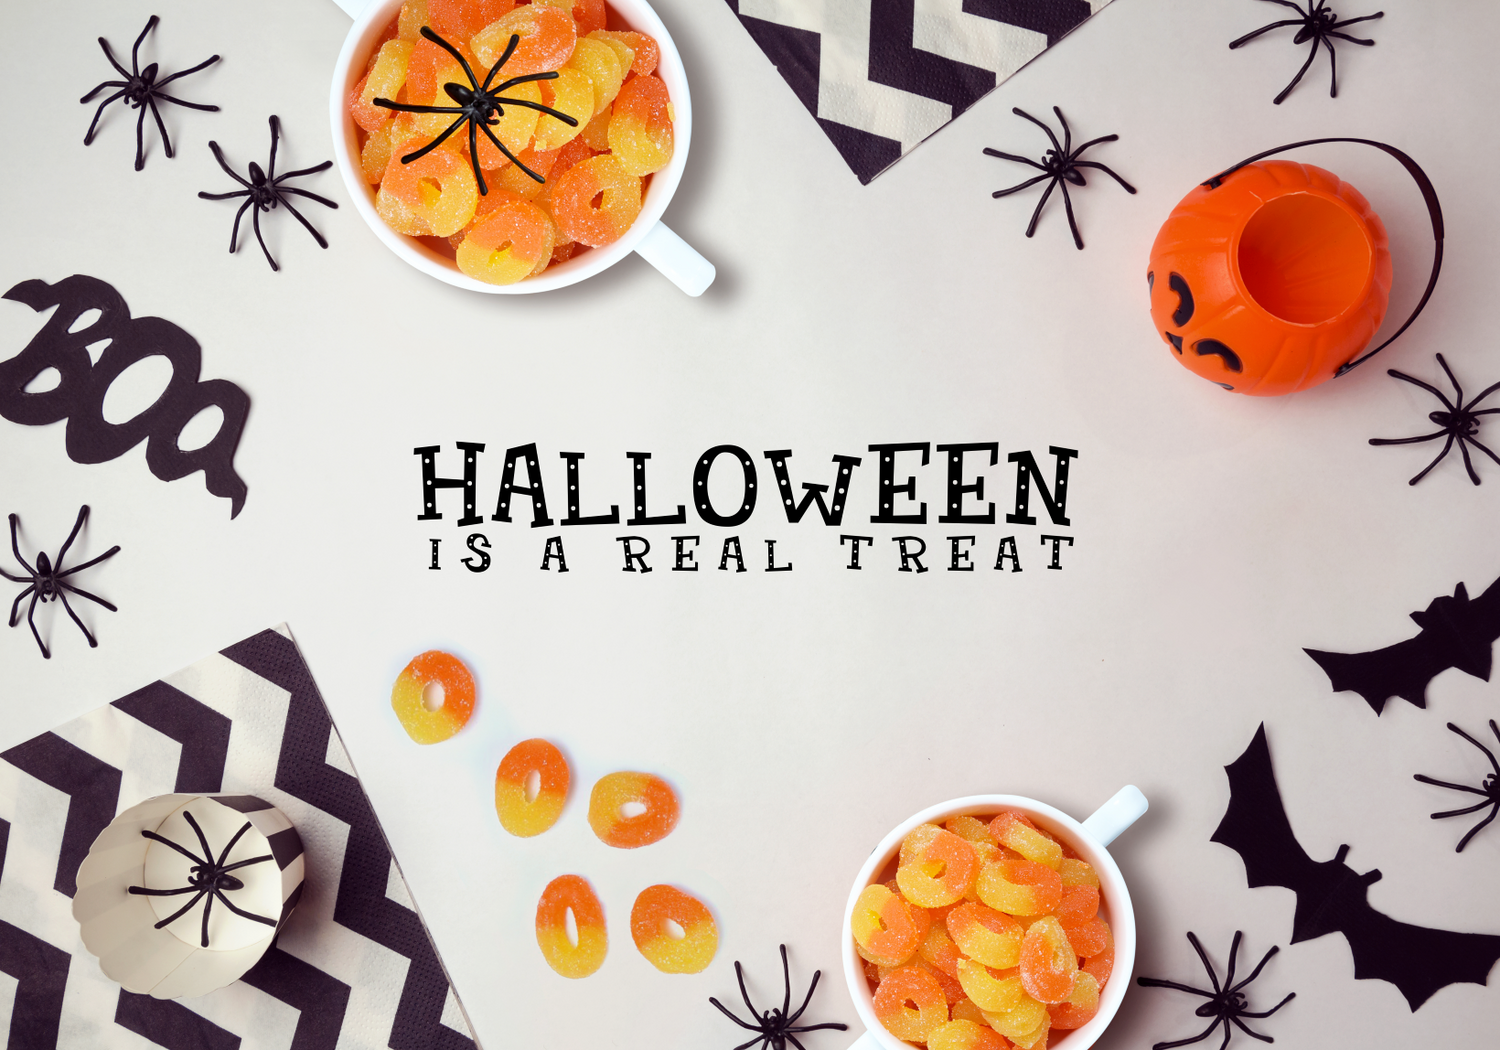 Trick or Treat this Halloween with Amazing Range of Candy and Chocolates